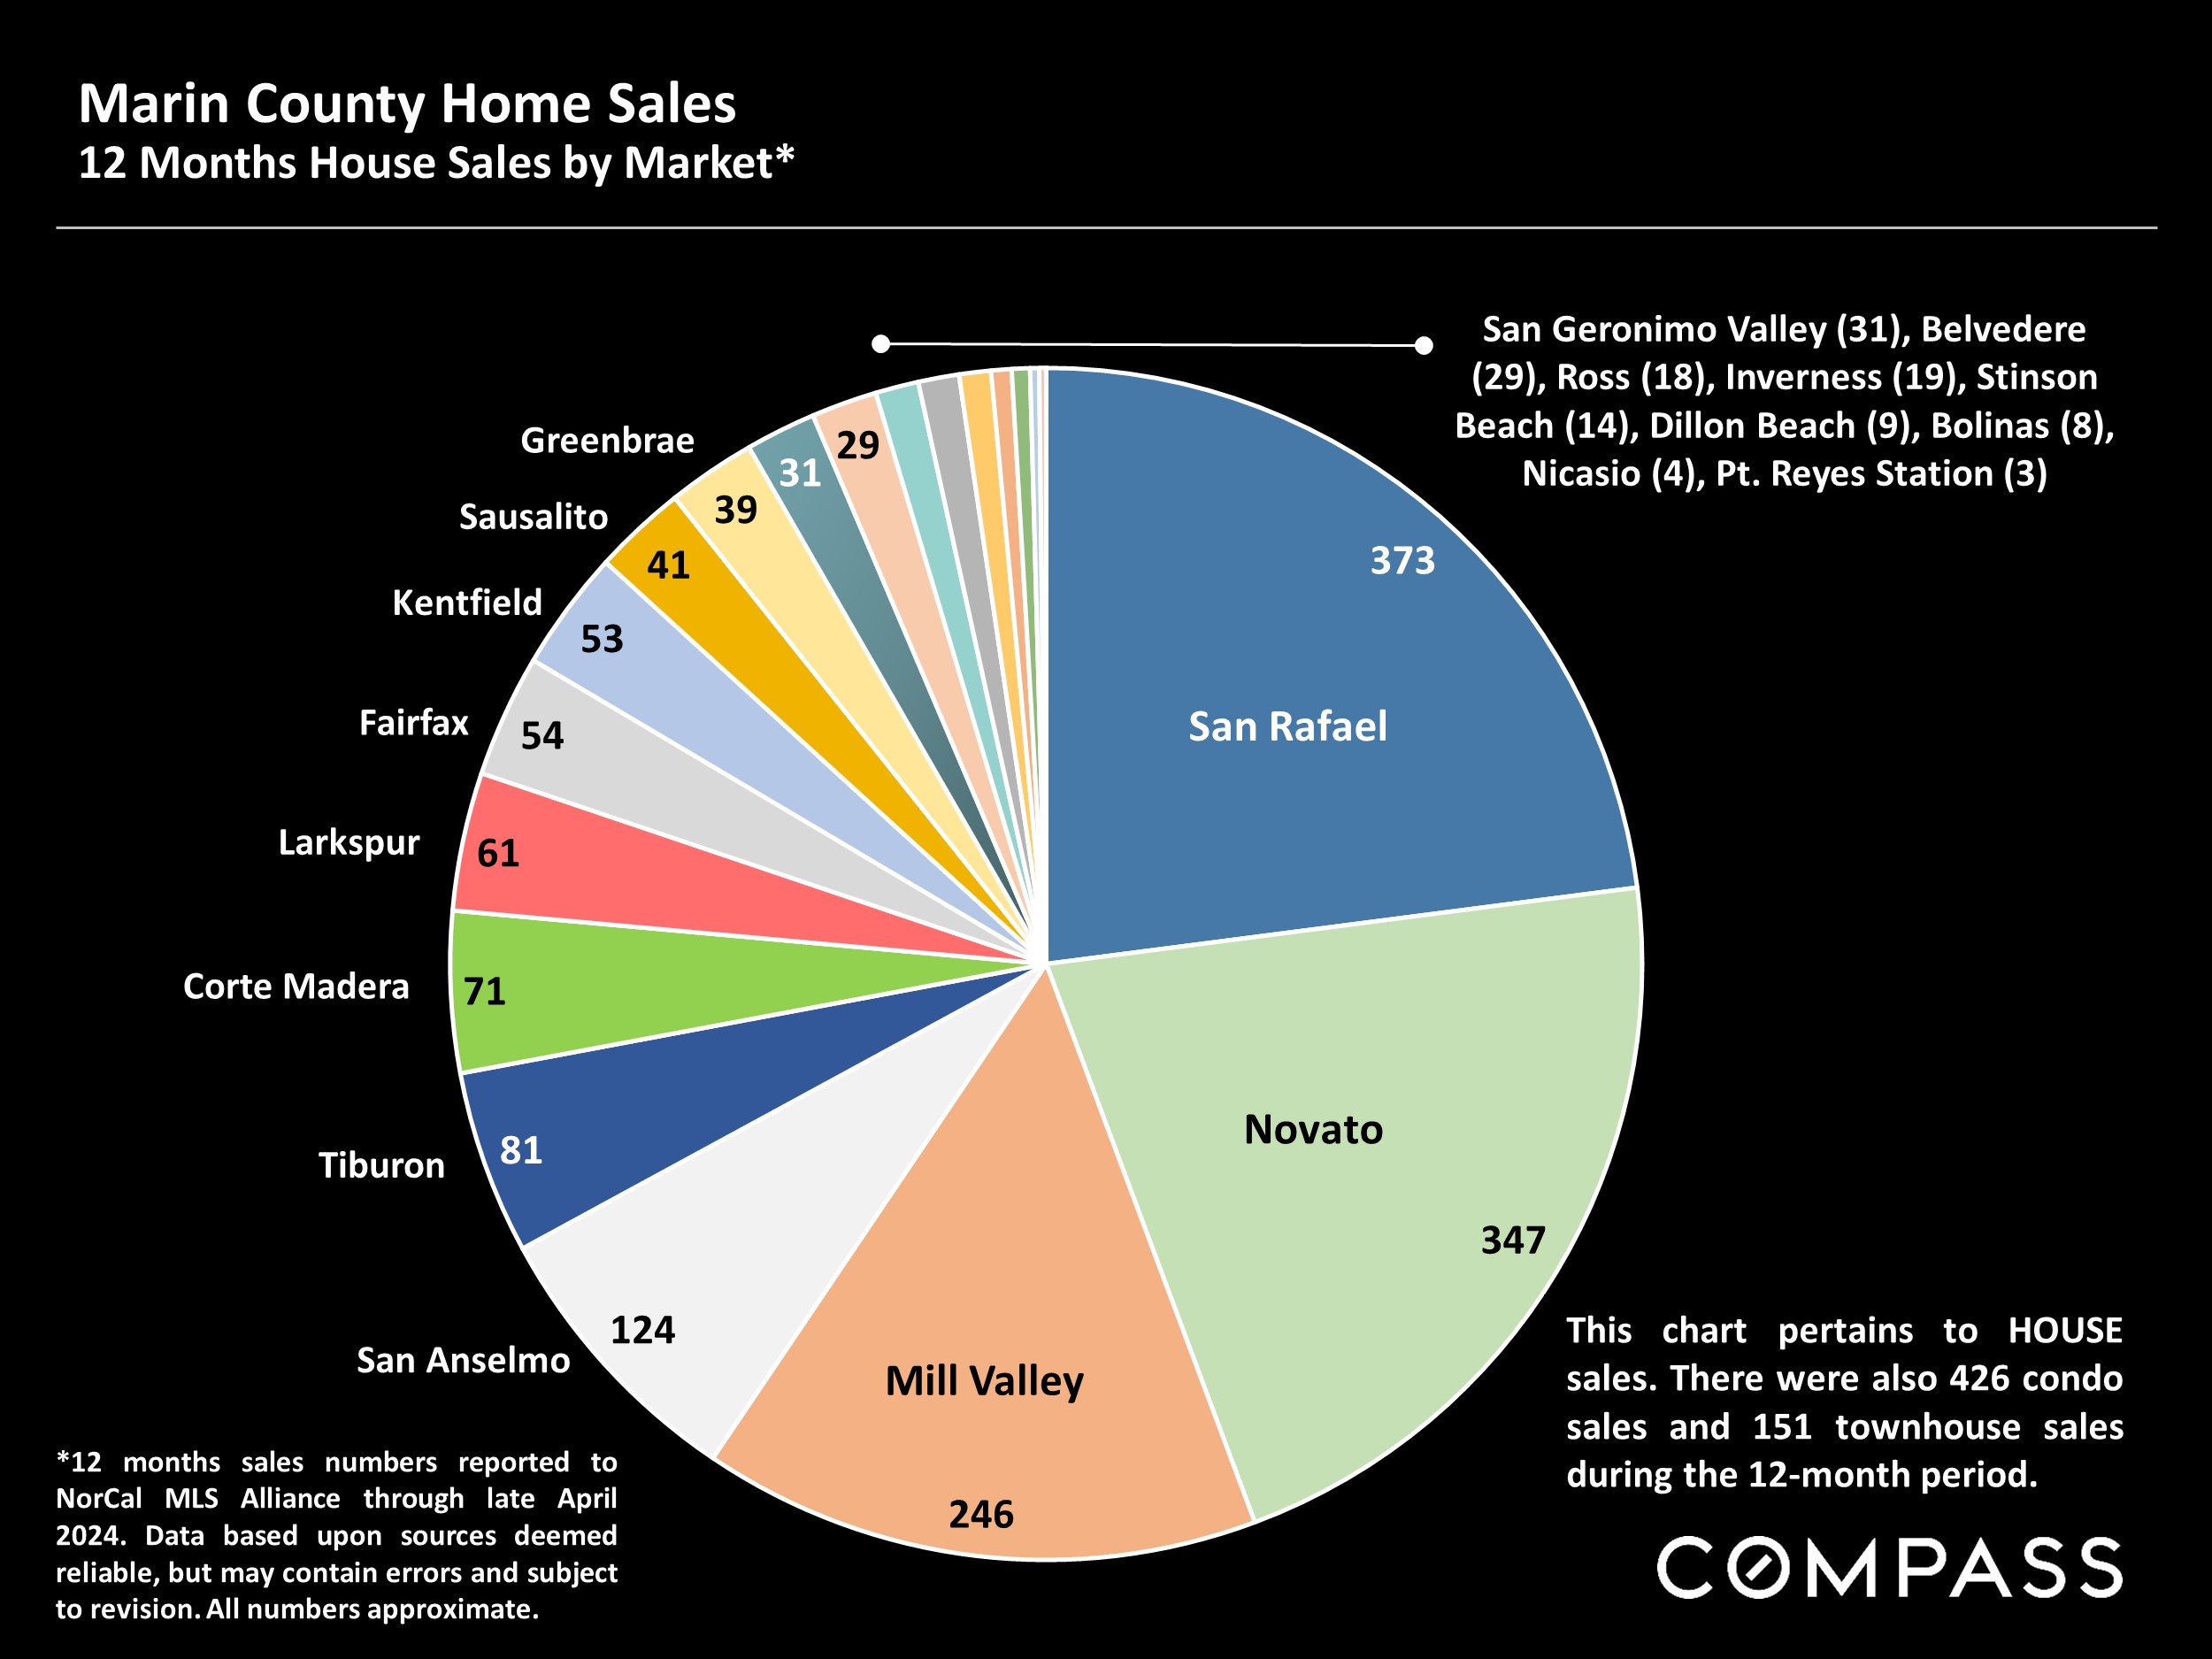 Marin County Home Sales 12 Months House Sales by Market*